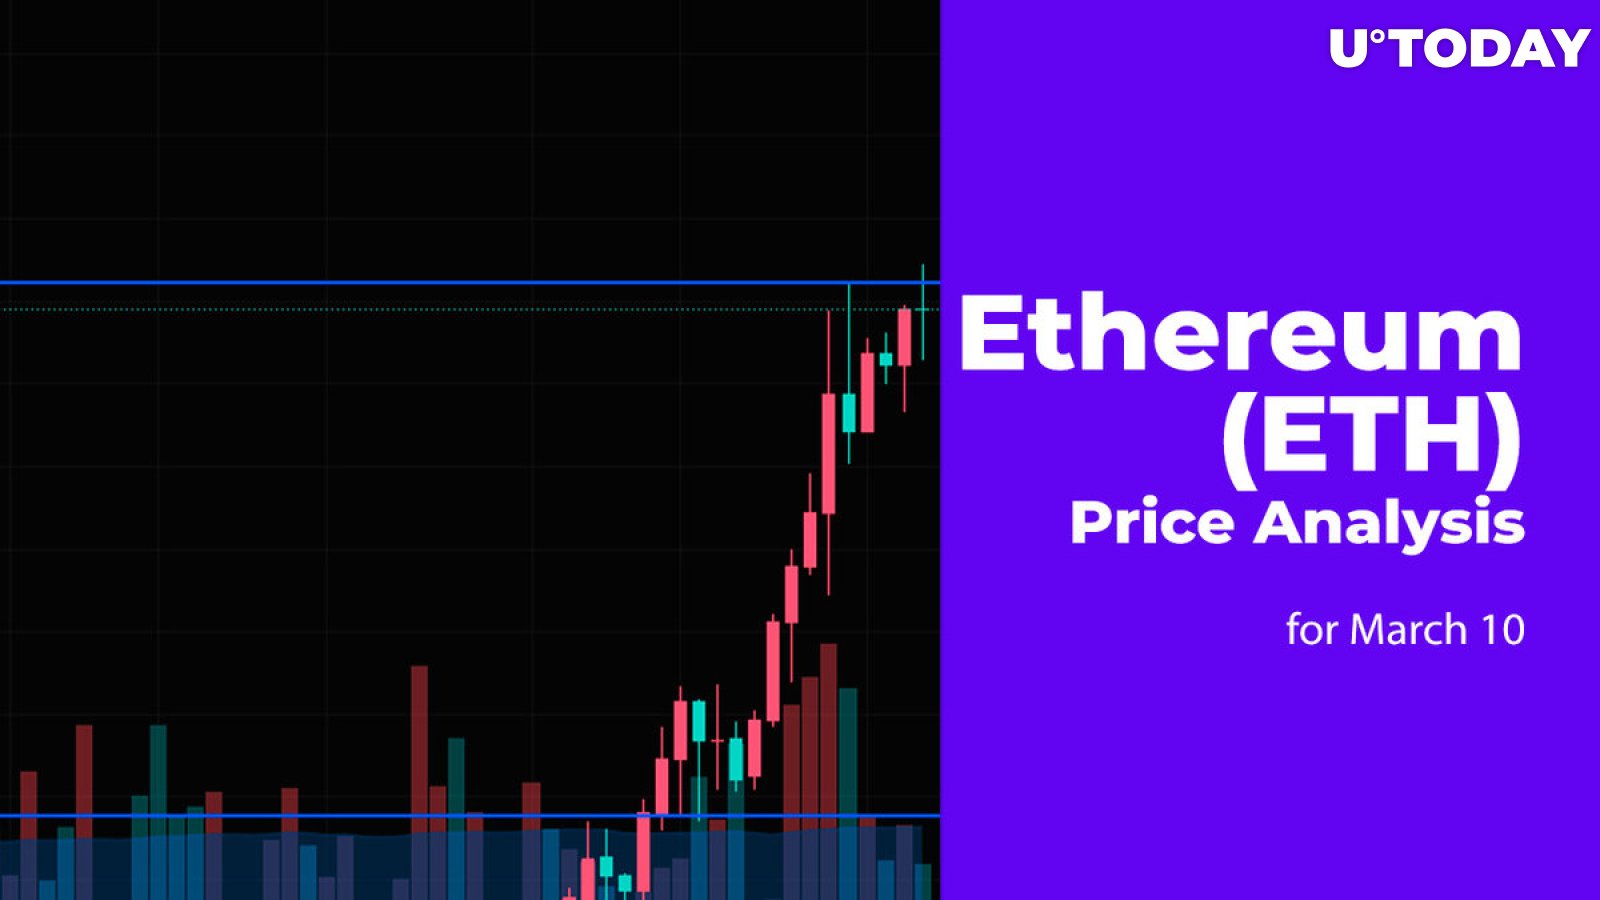 Ethereum (ETH) Price Prediction for March 10